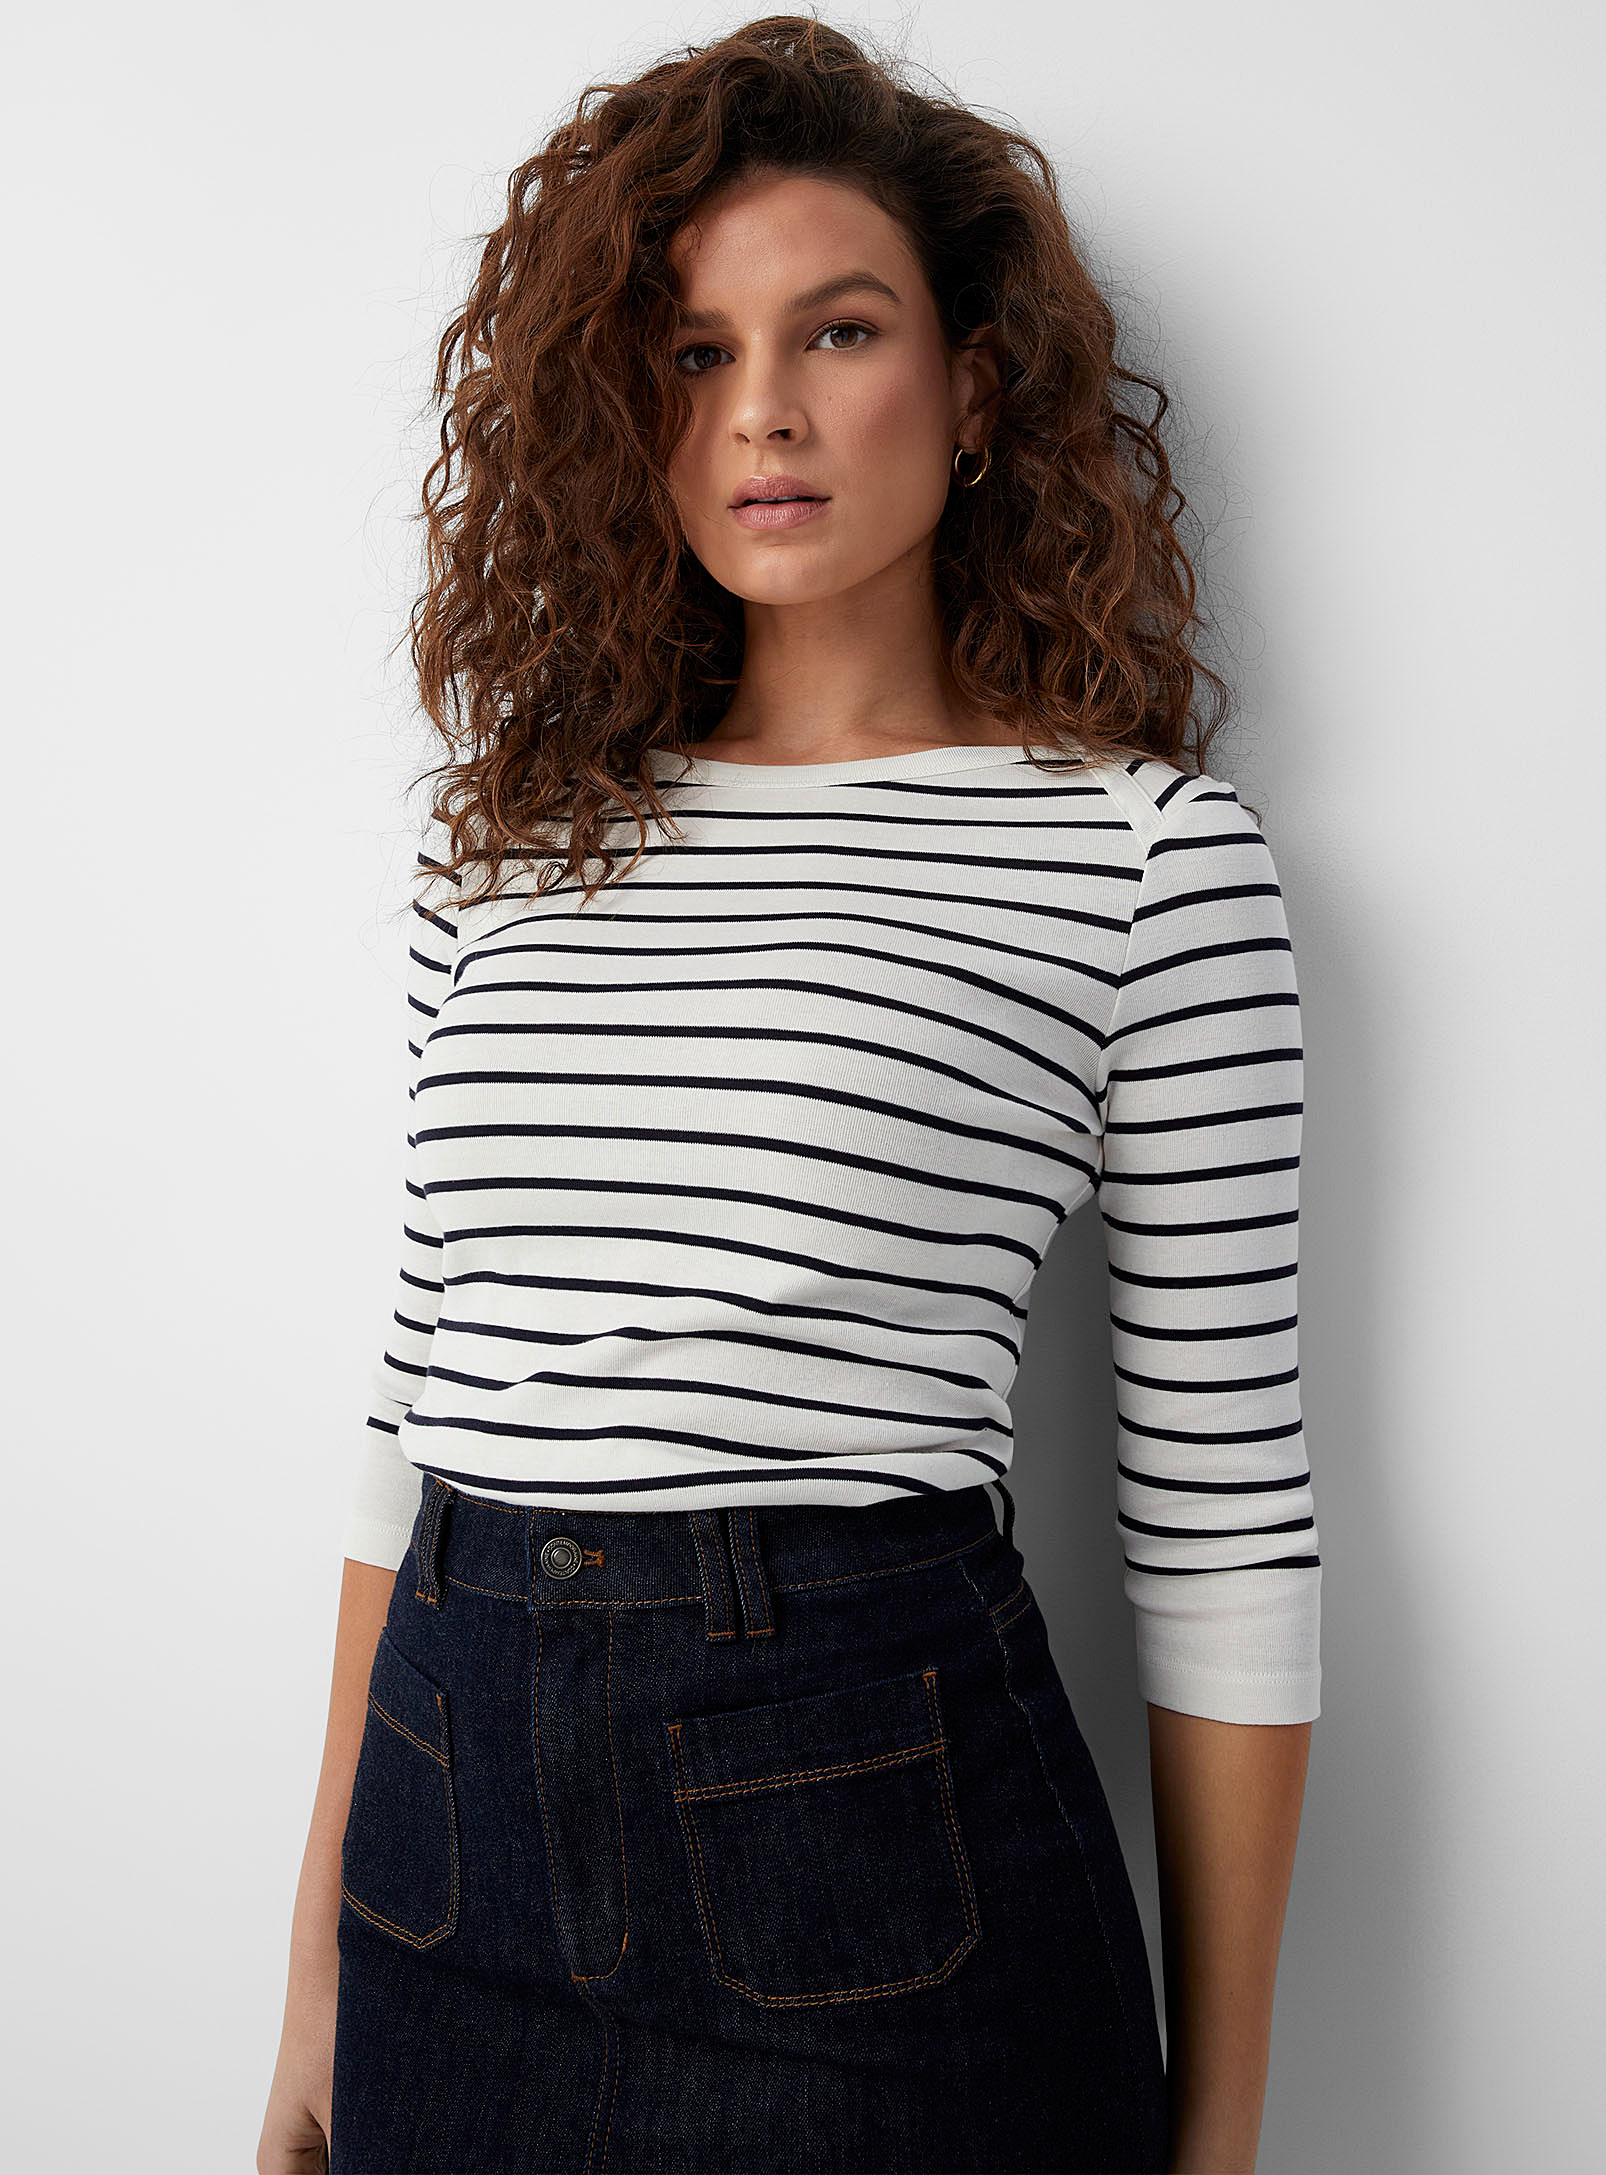 Contemporaine Boatneck Sailor T-shirt In Patterned White